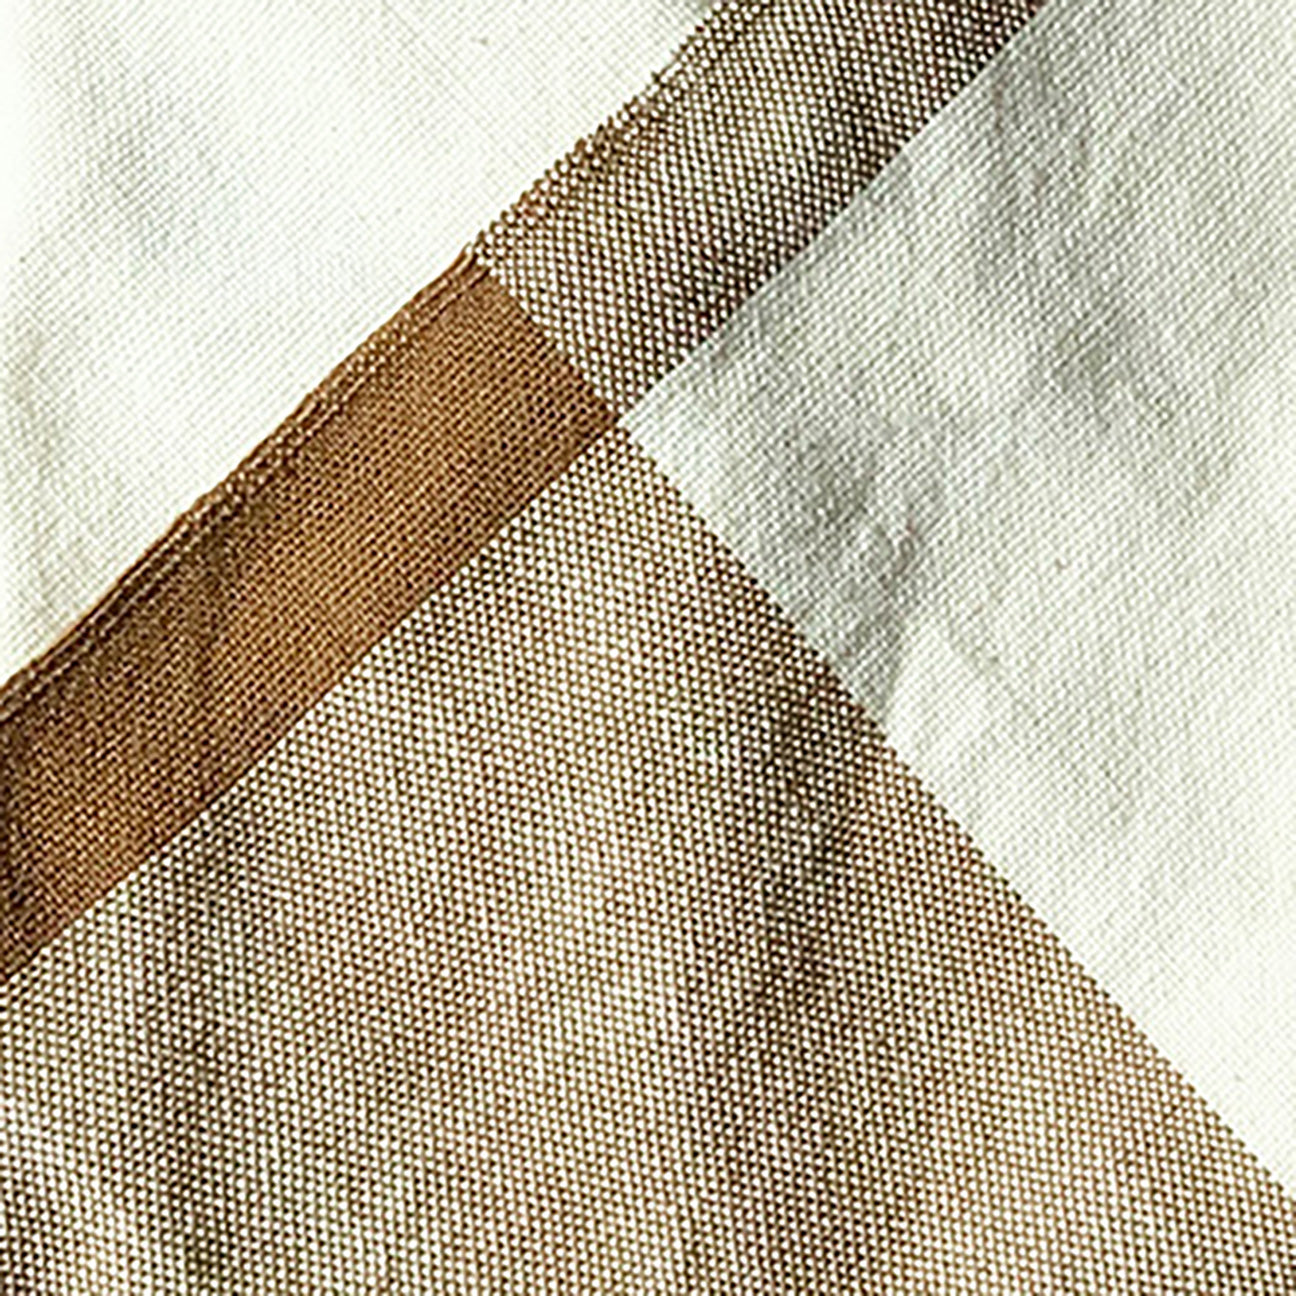 HAND LOOMED COLORBLOCK NAPKINS